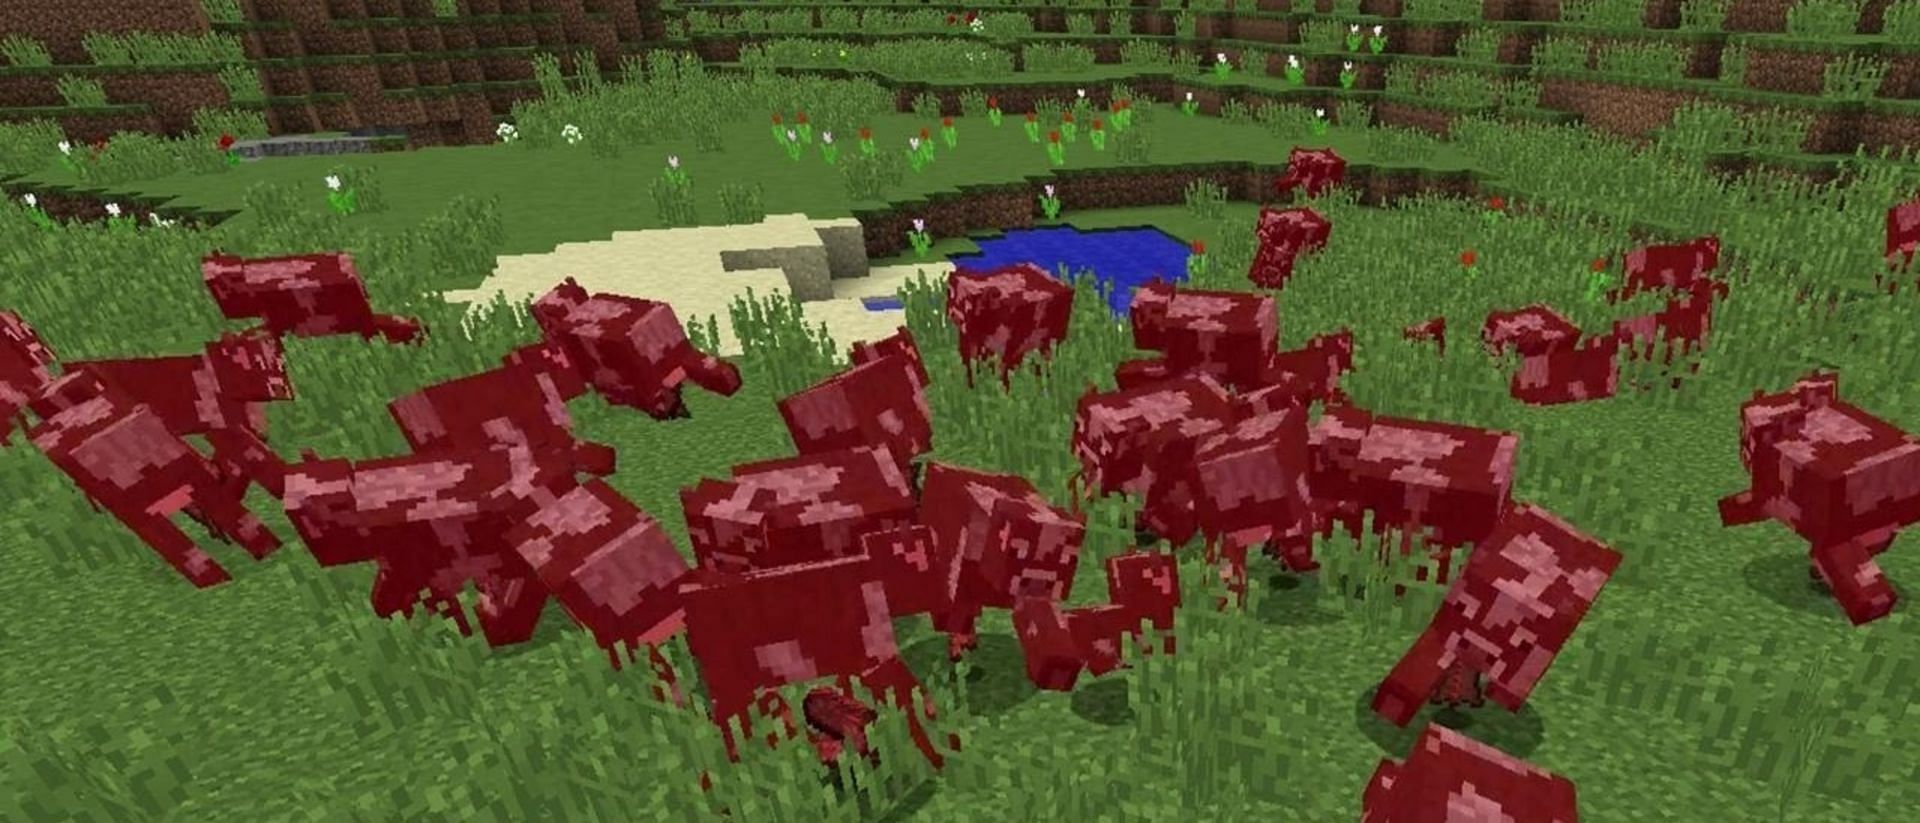 /Kill does exactly what one expects; it kills a given entity (Image via OMGCraft/Youtube)